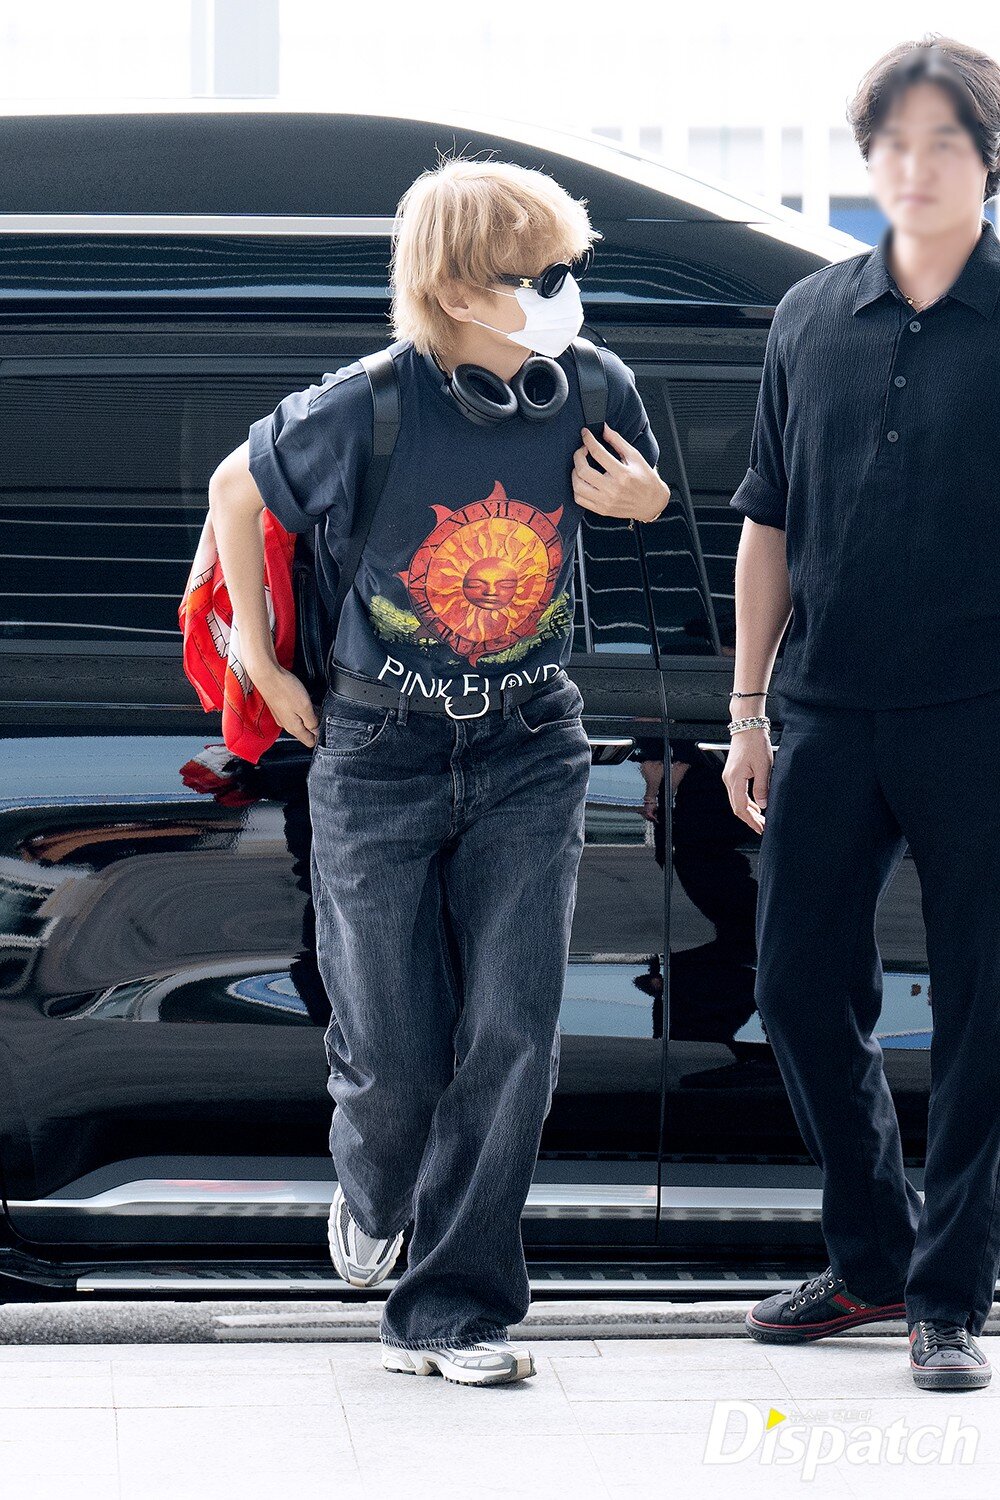 BTS' V's 5 best airport looks